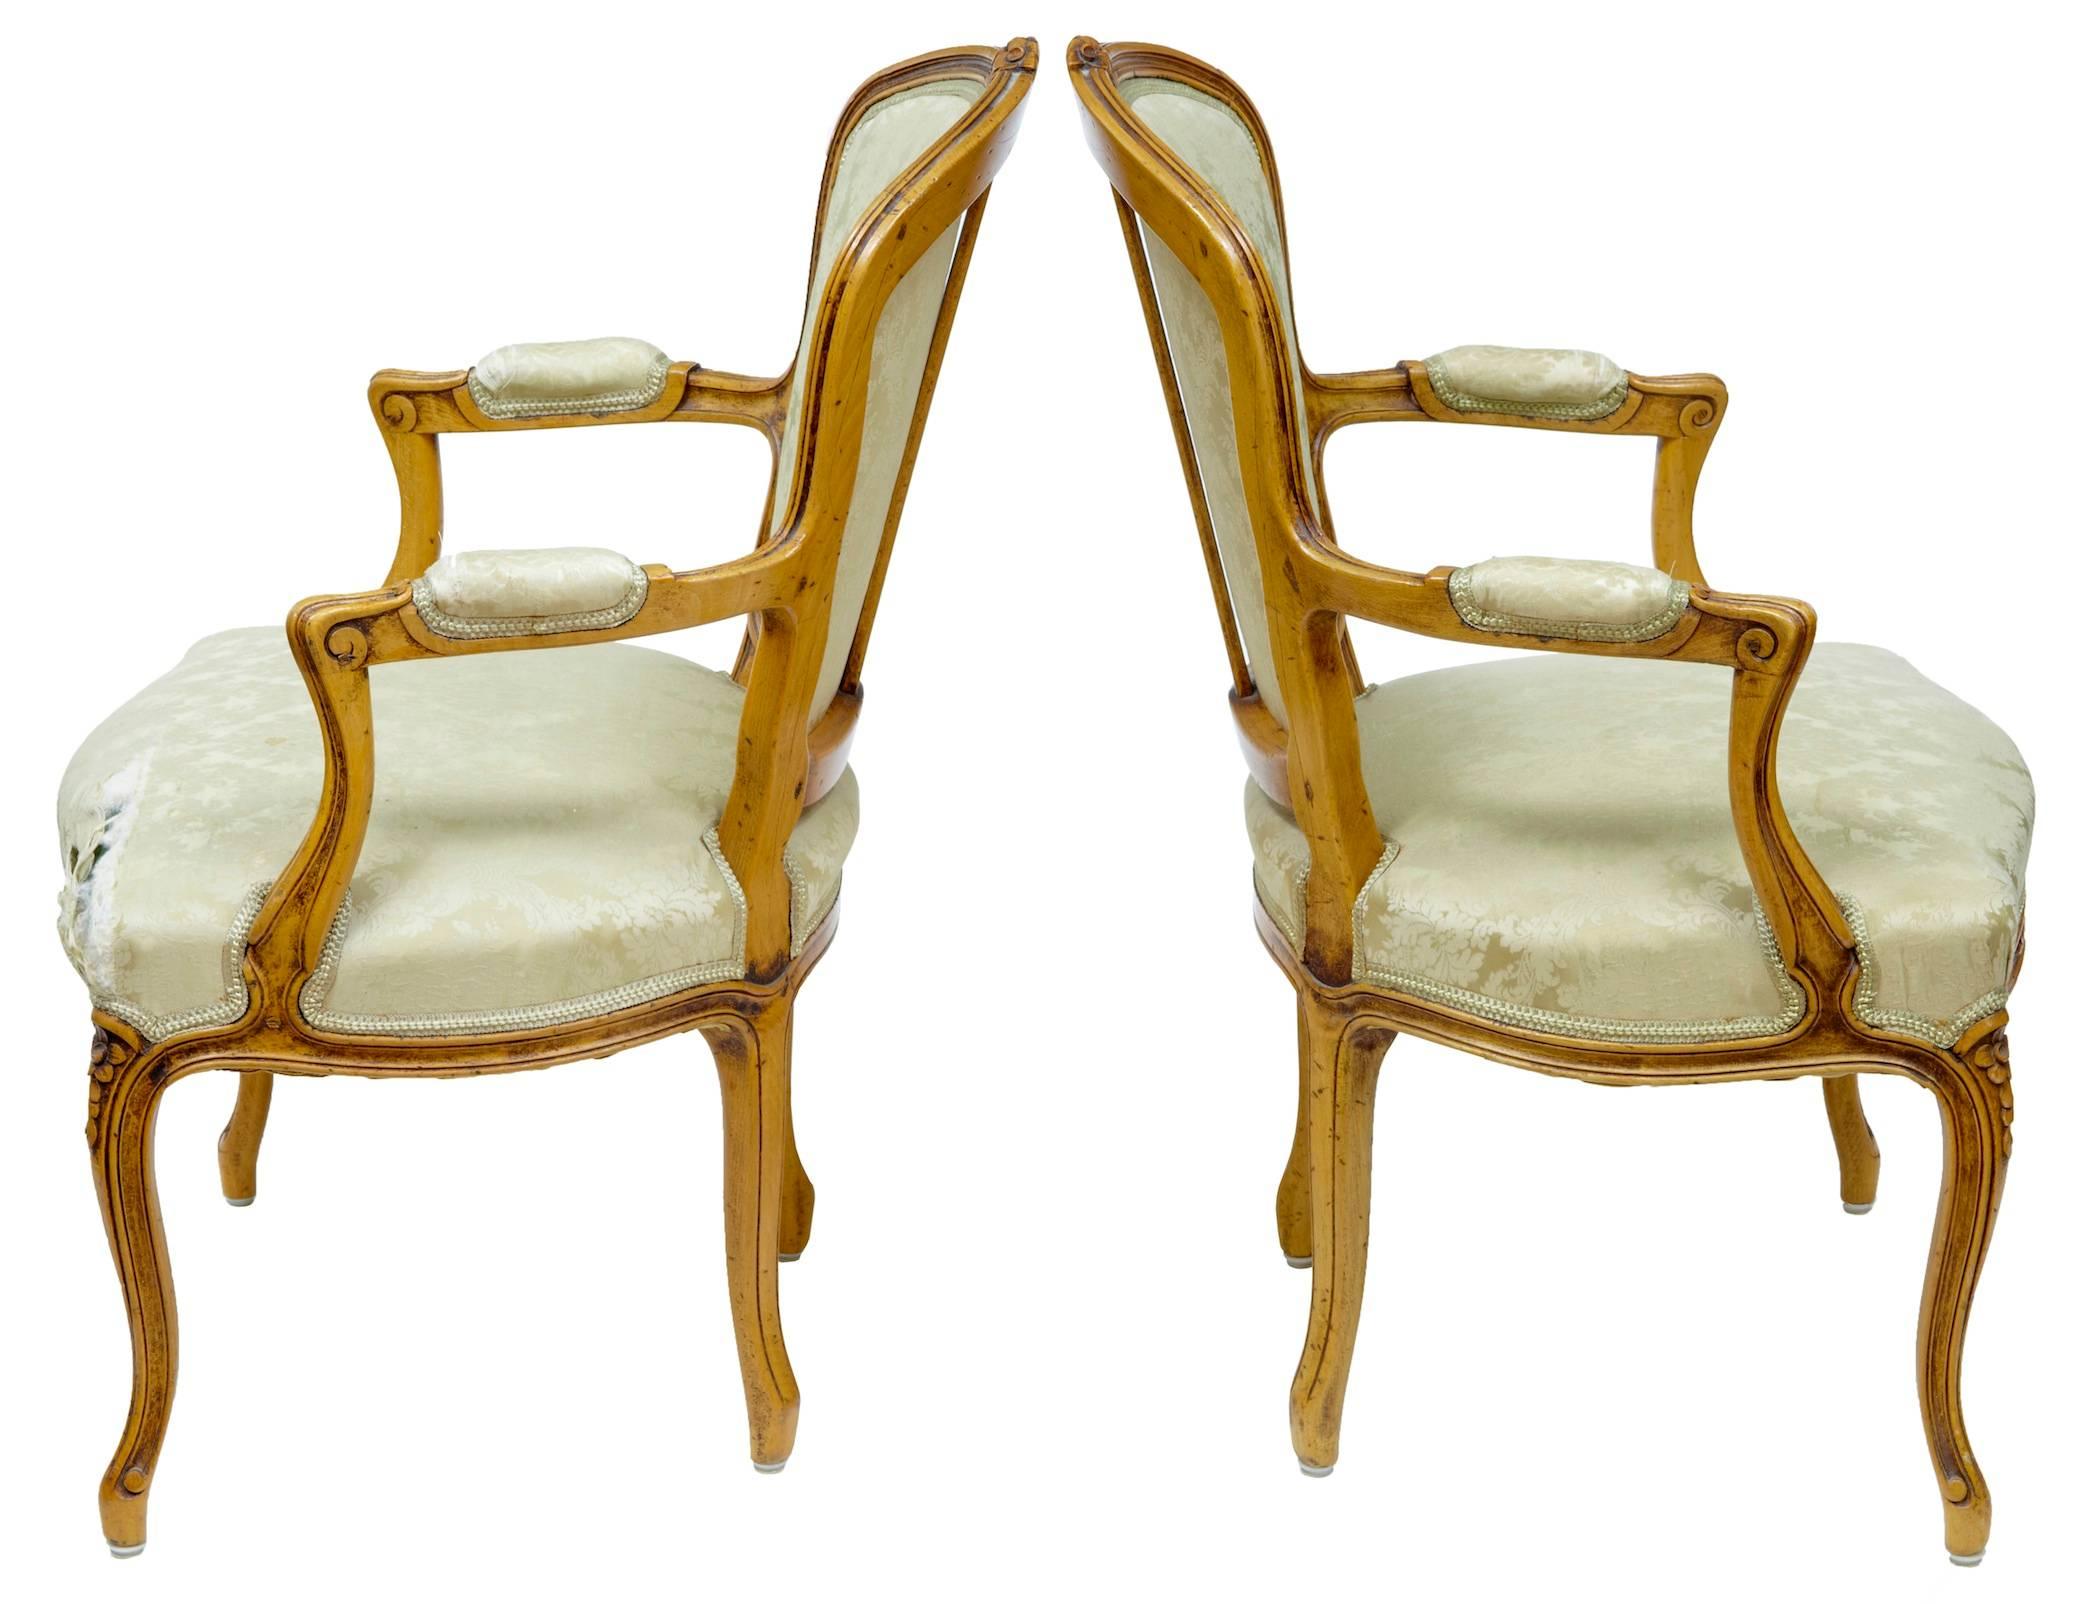 Excellent quality pair of French armchairs, circa 1840. Faint traces of the original green/blue paint, this has been later stripped to reveal a beautiful color beech, carved to the back and on the knee. In need of recovering as one corner is worn,